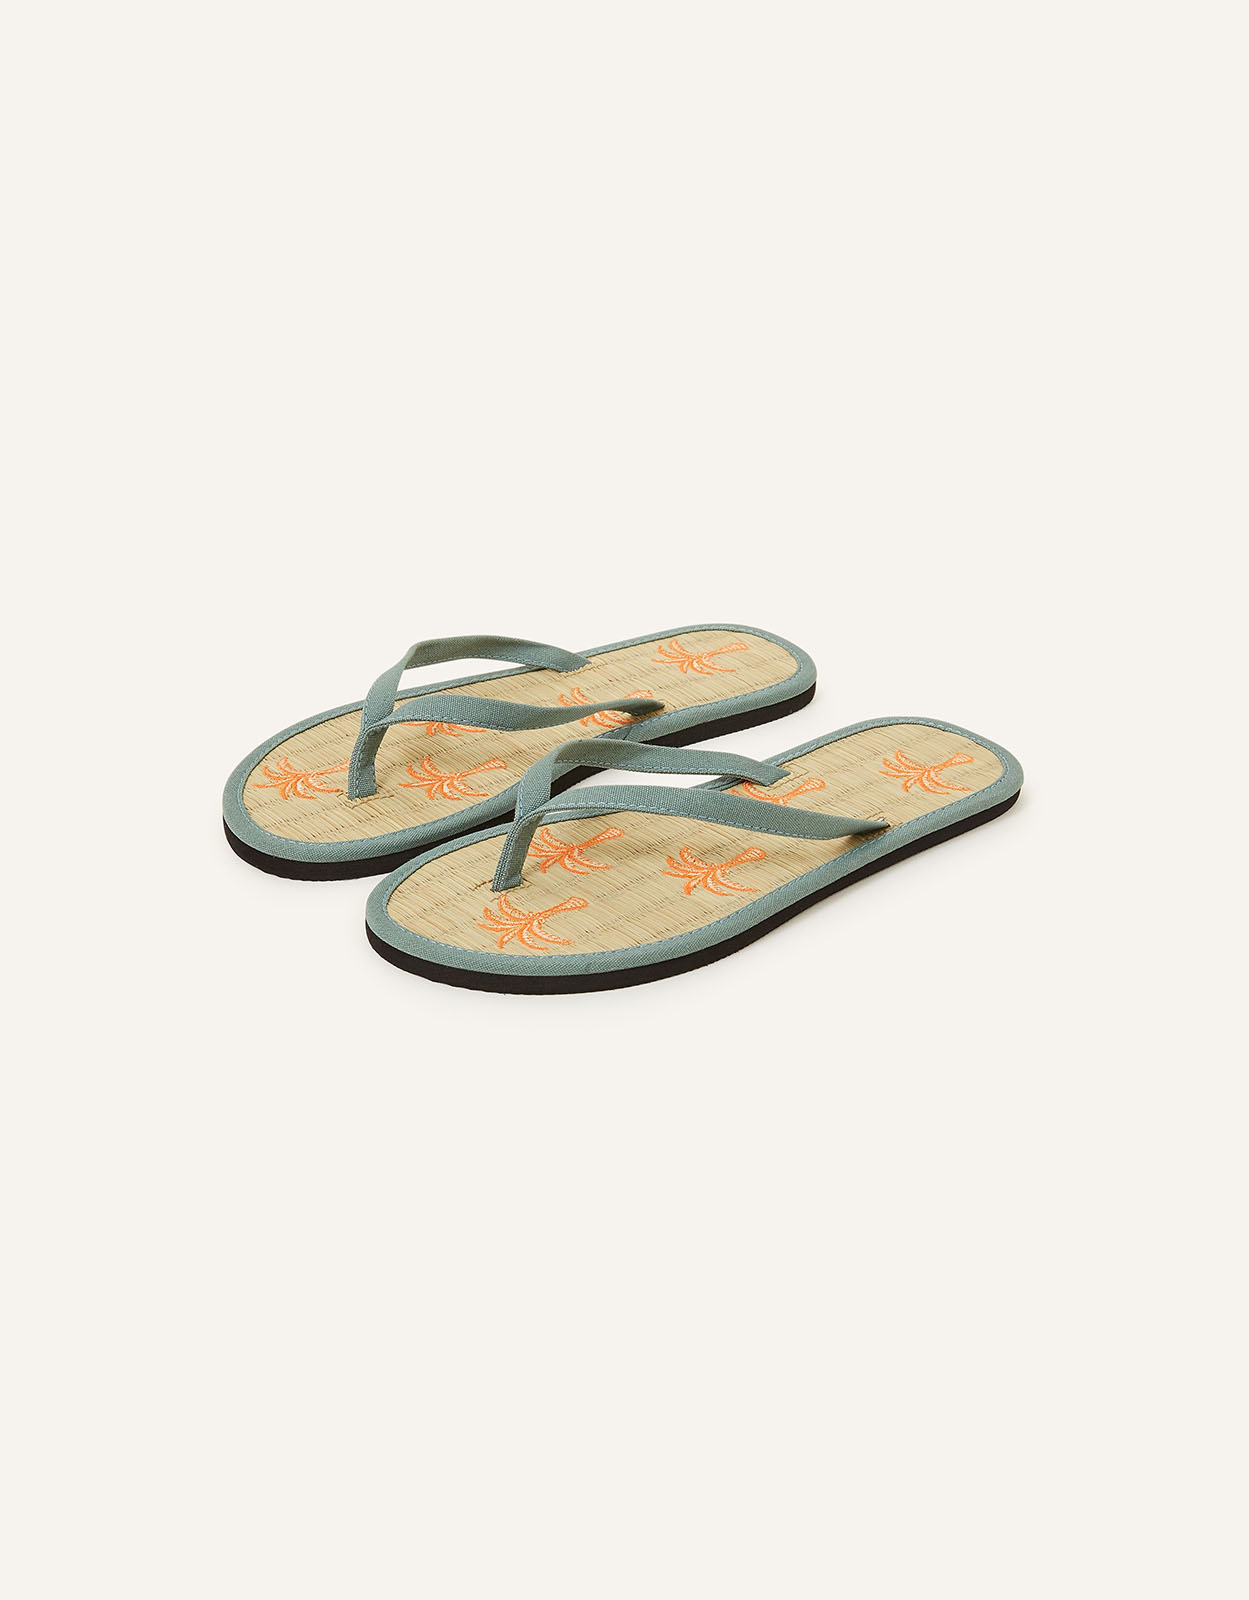 Accessorize Women's Green Embroidered Palm Tree Seagrass Flip Flops, Size: M